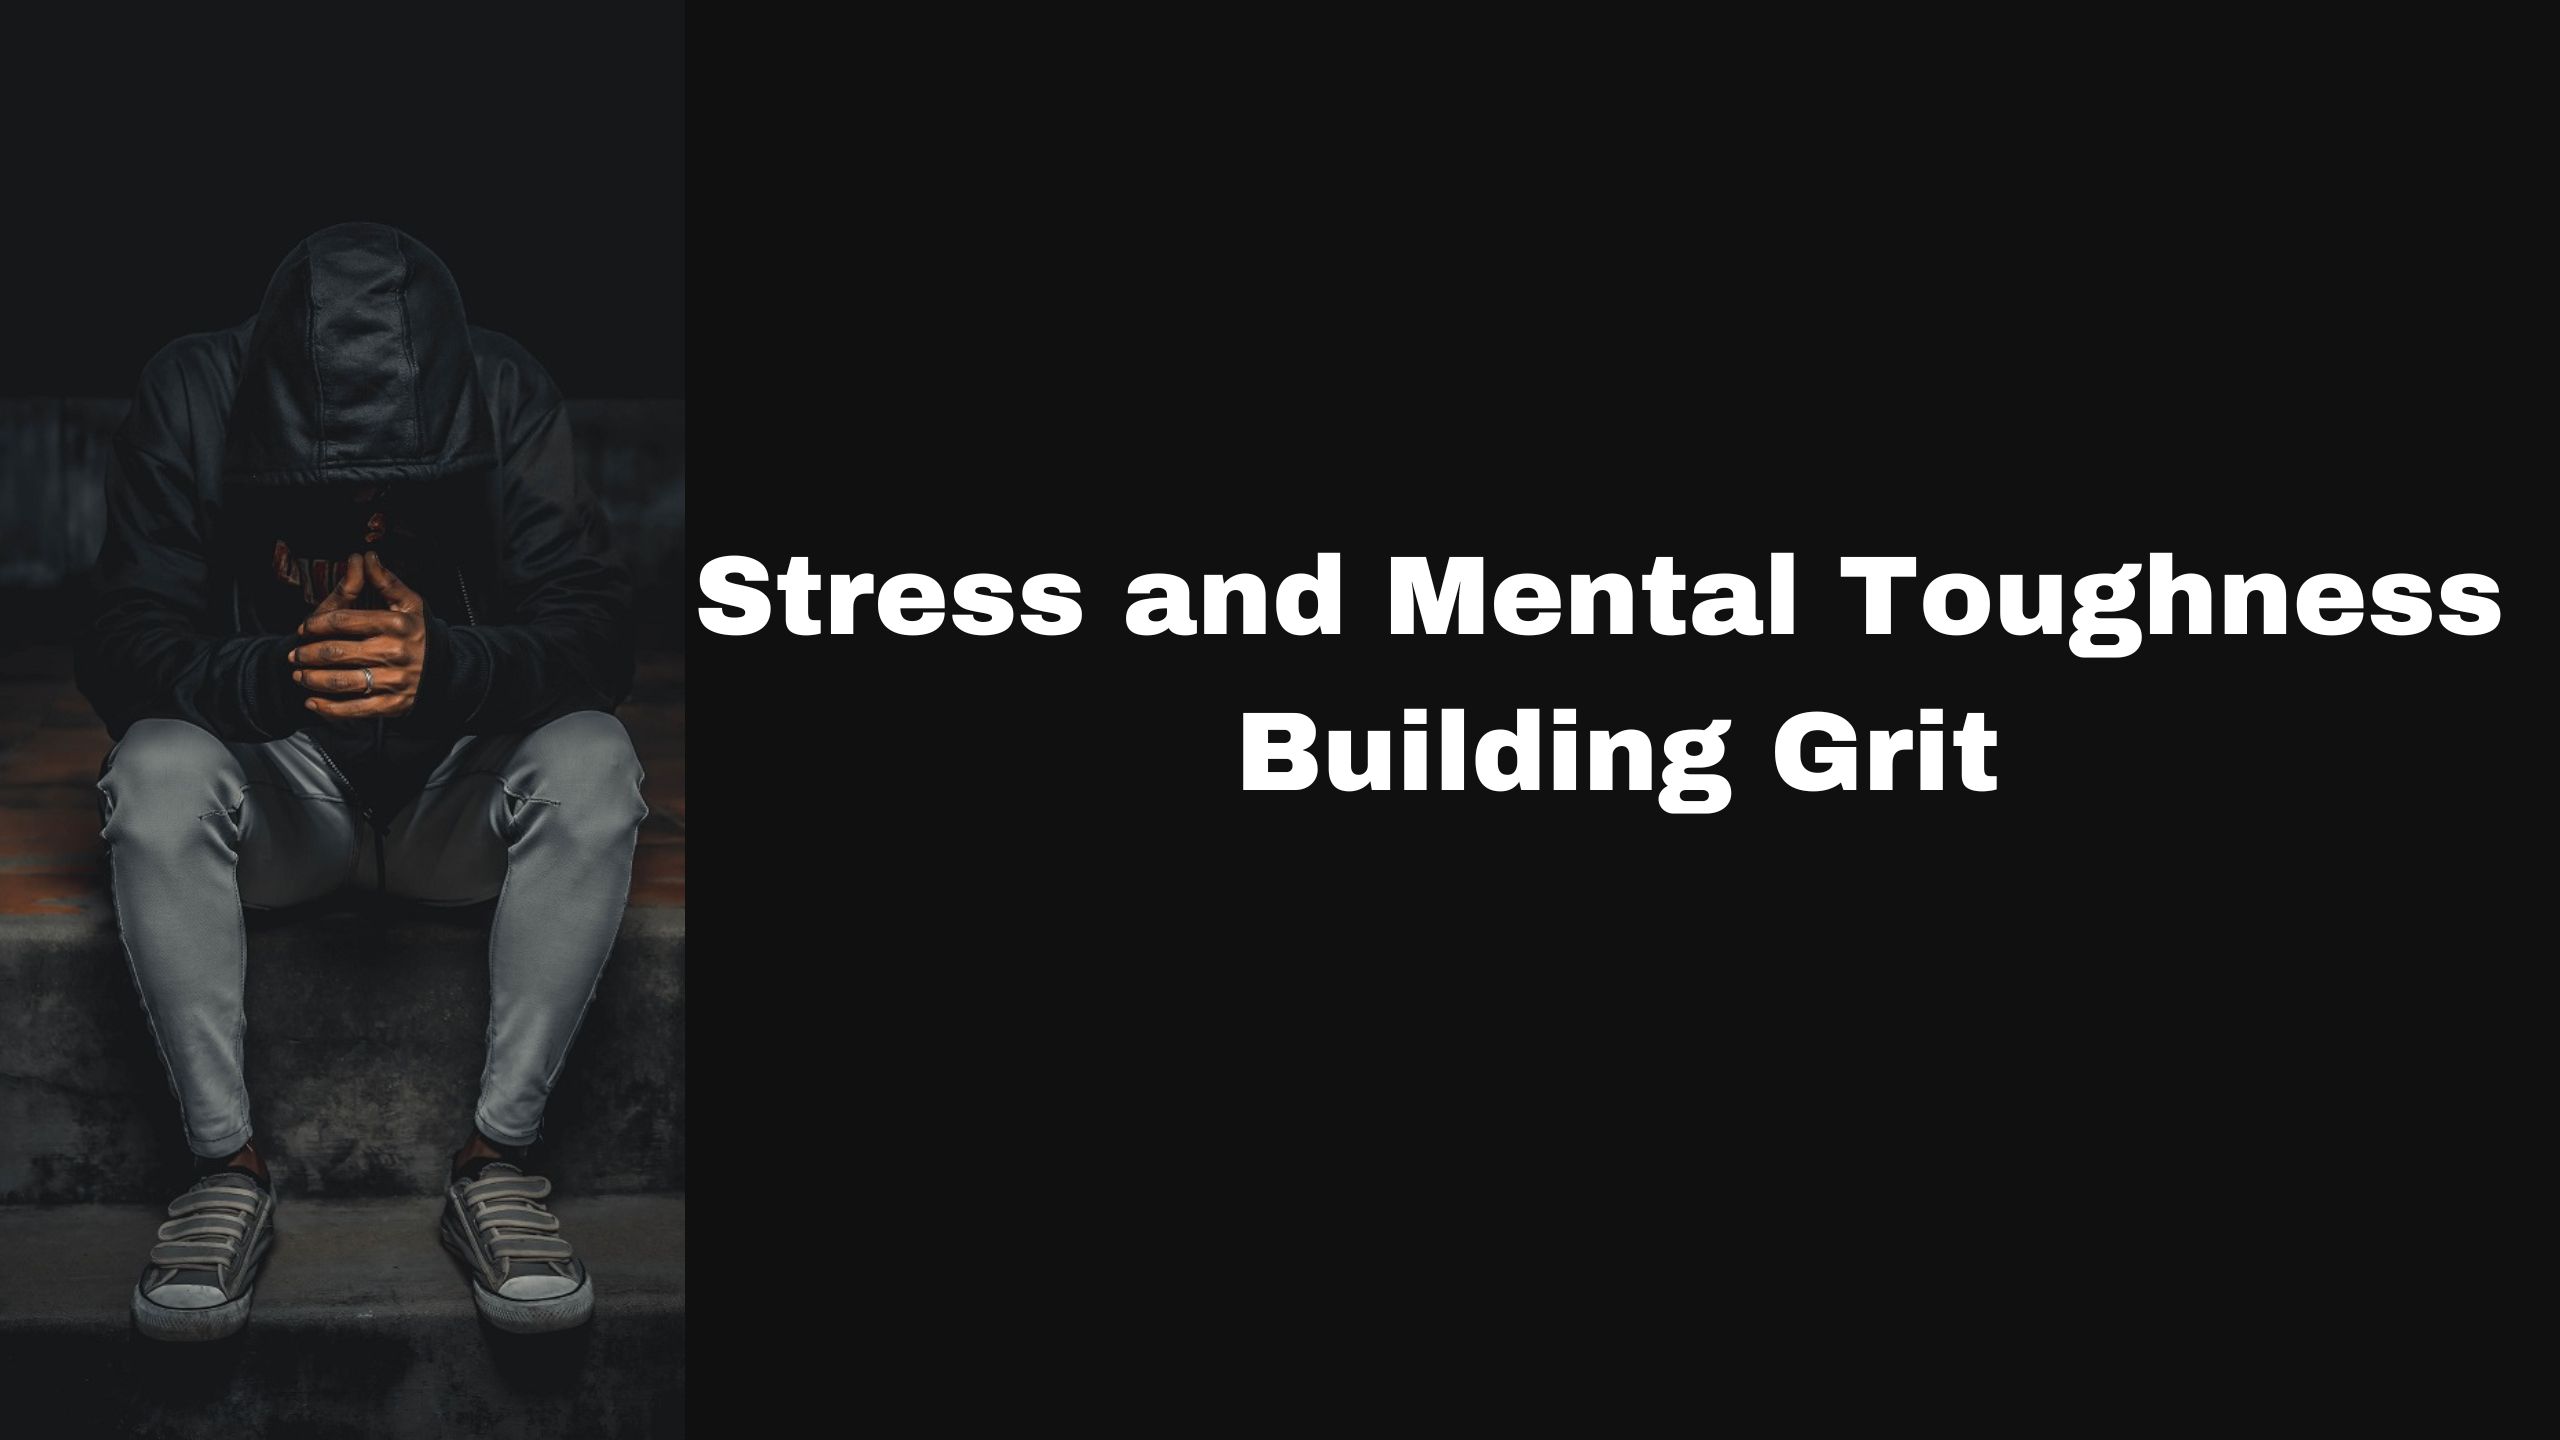 Stress and Mental Toughness